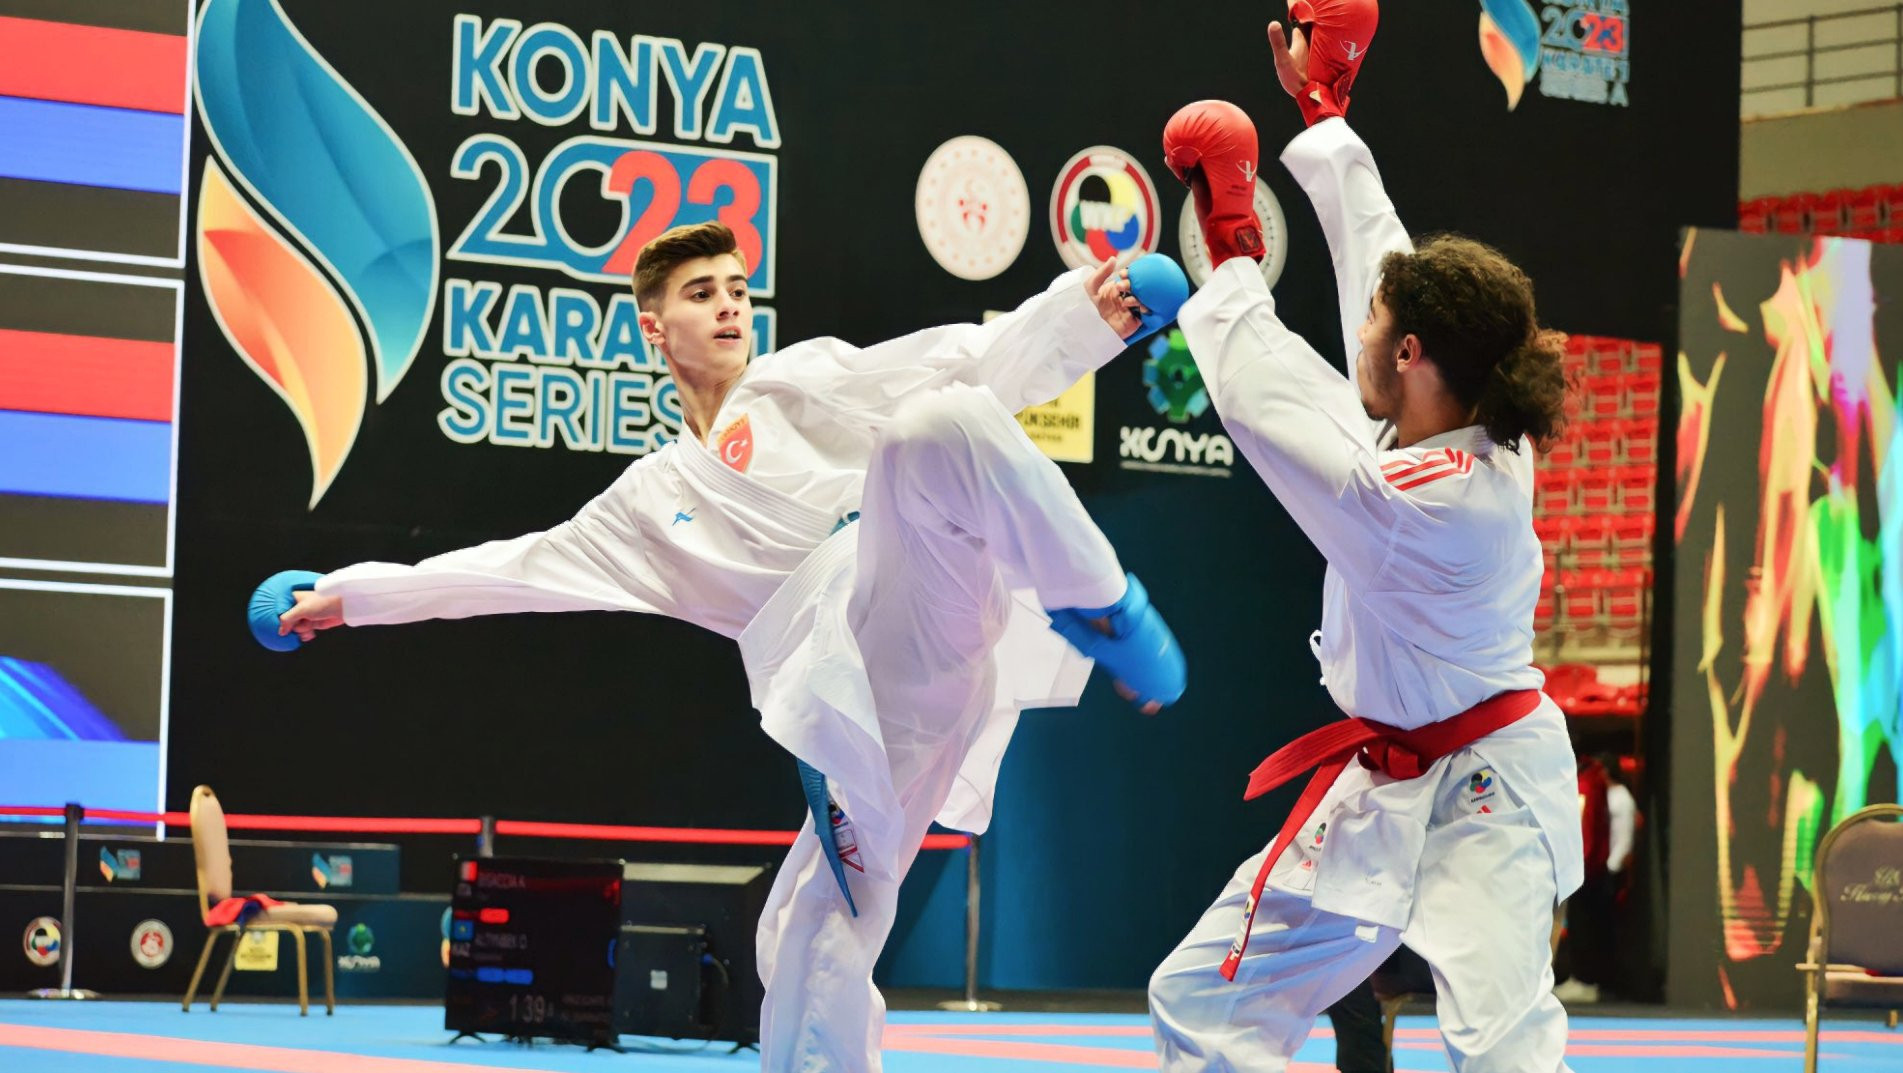 Turkey topped the standings at the Karate 1-Series A event in Konya ©WKF